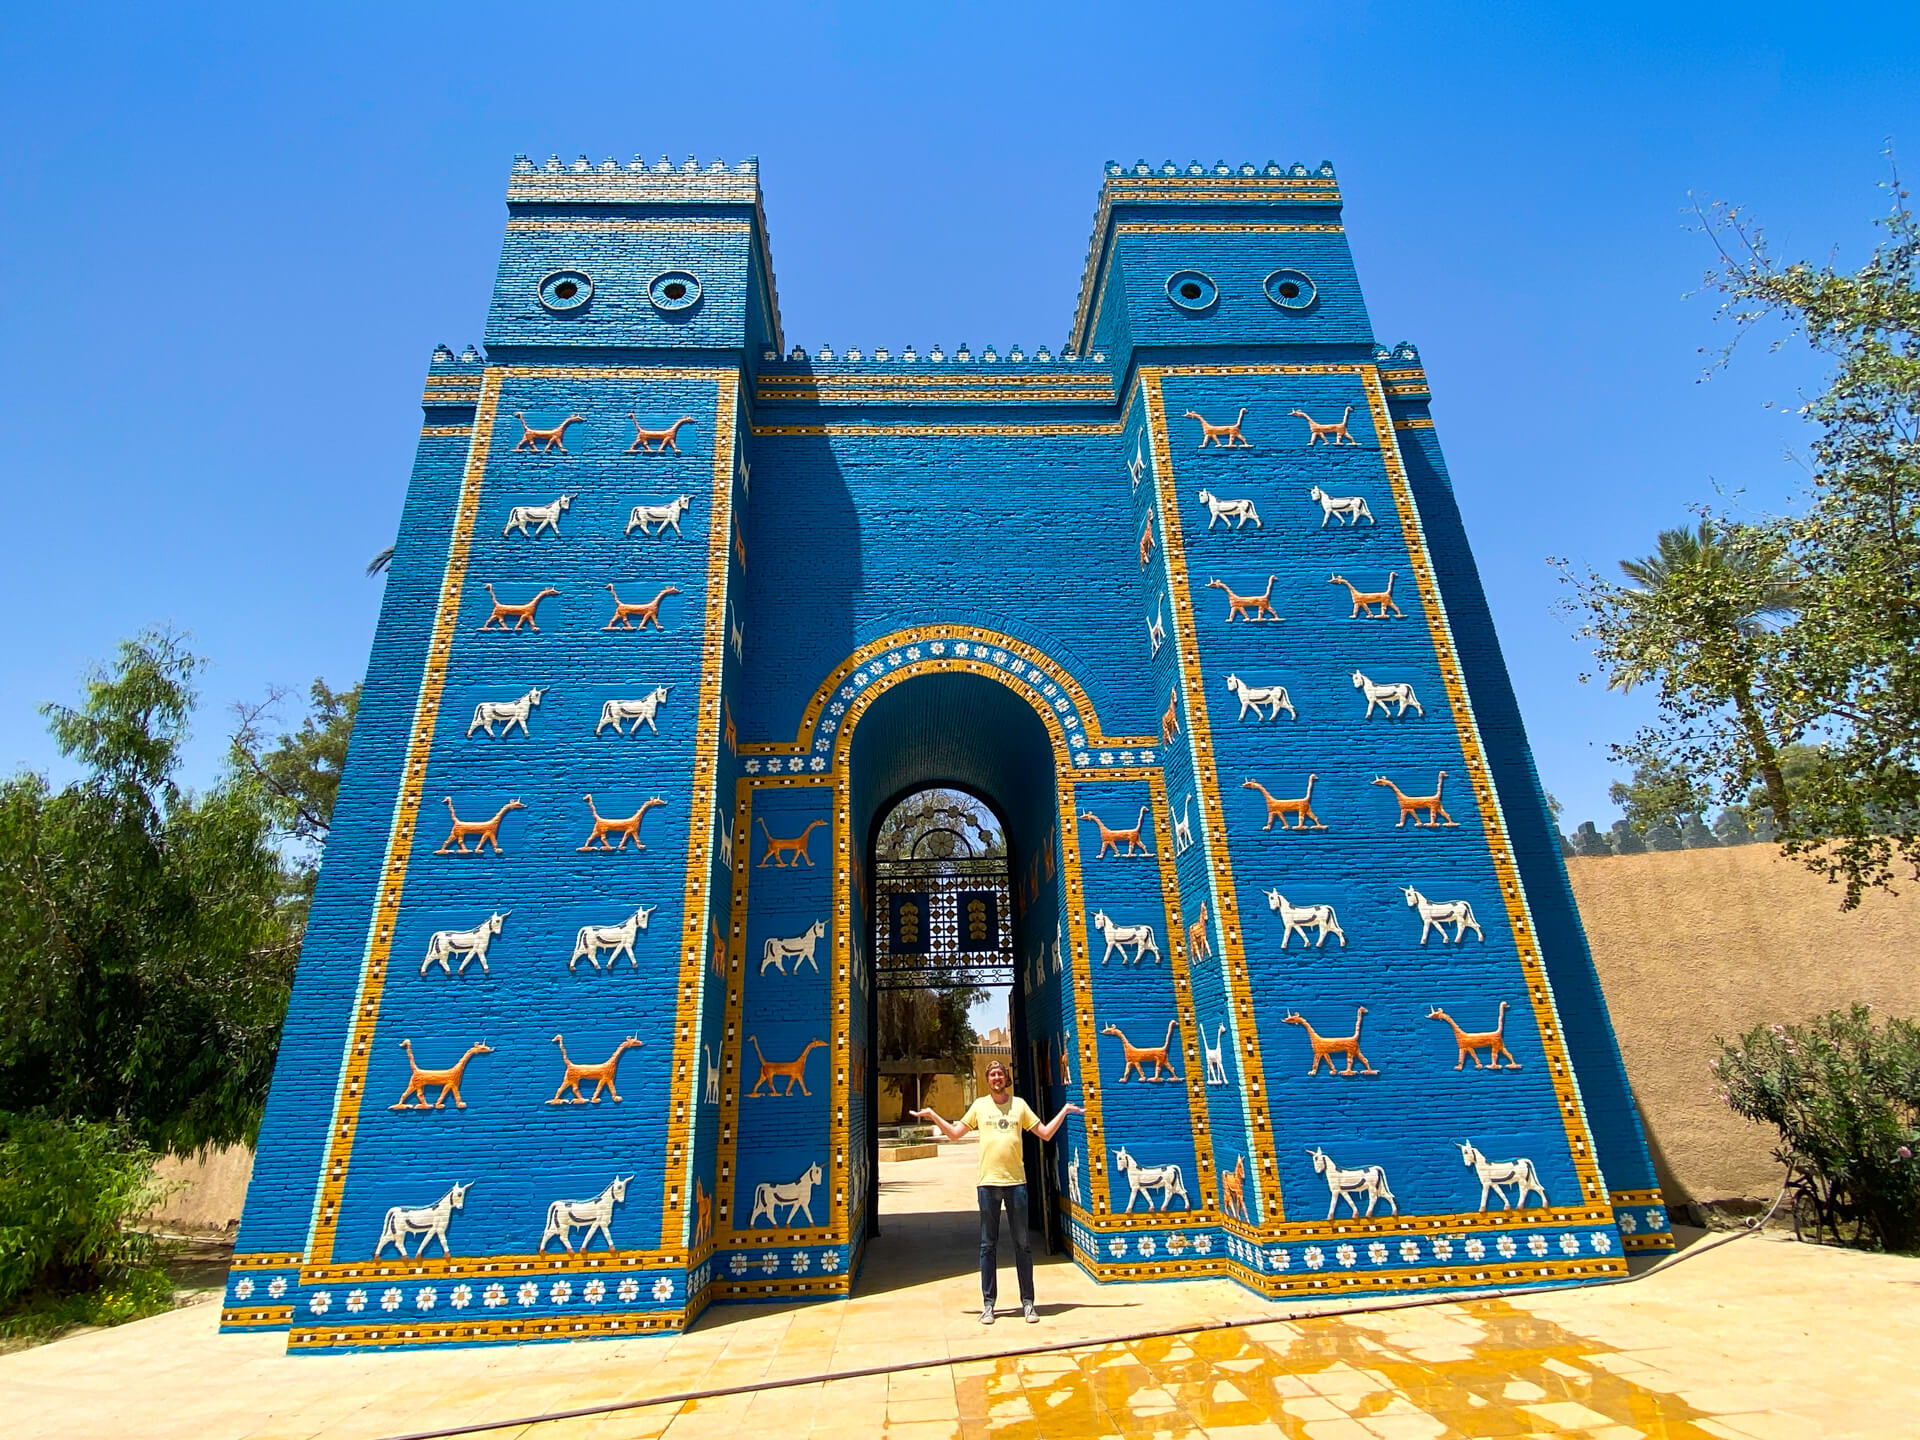 Me standing in front of the Ishtar Gate in Babylon, Iraq